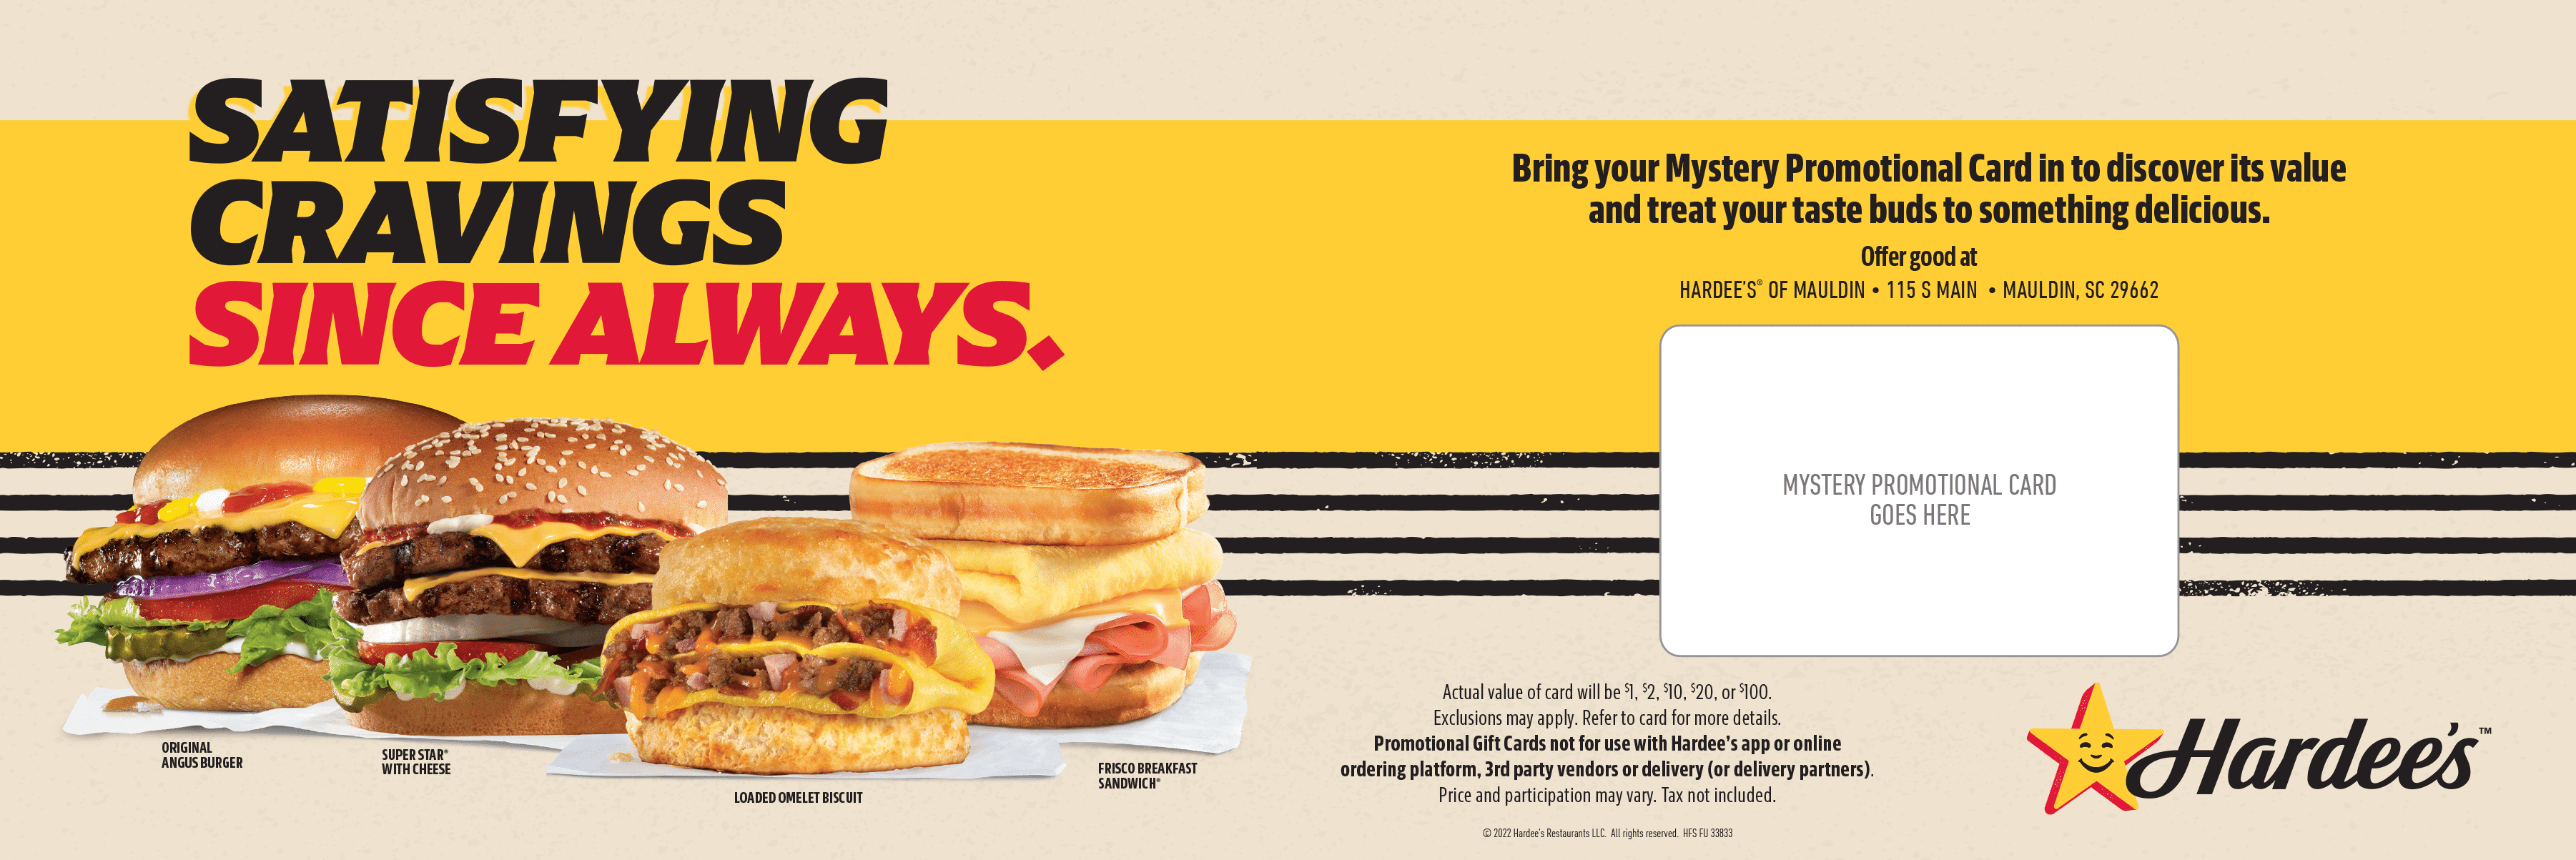 hardee's direct mail piece with burgers and biscuits